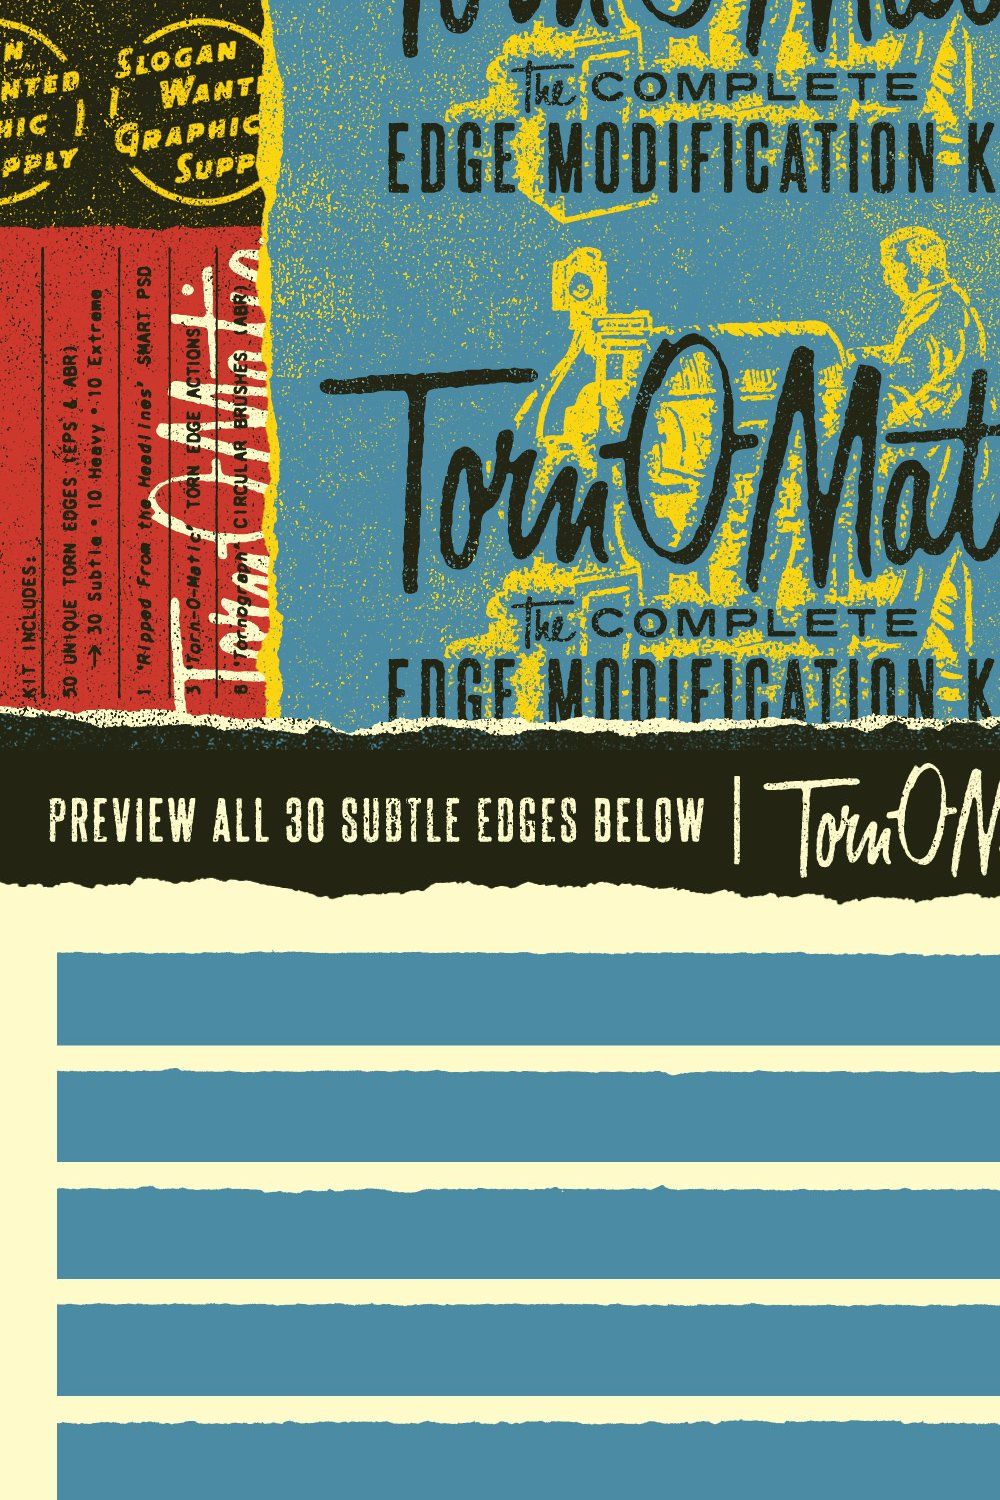 Torn-O-Matic | Edge Modification Kit pinterest preview image.